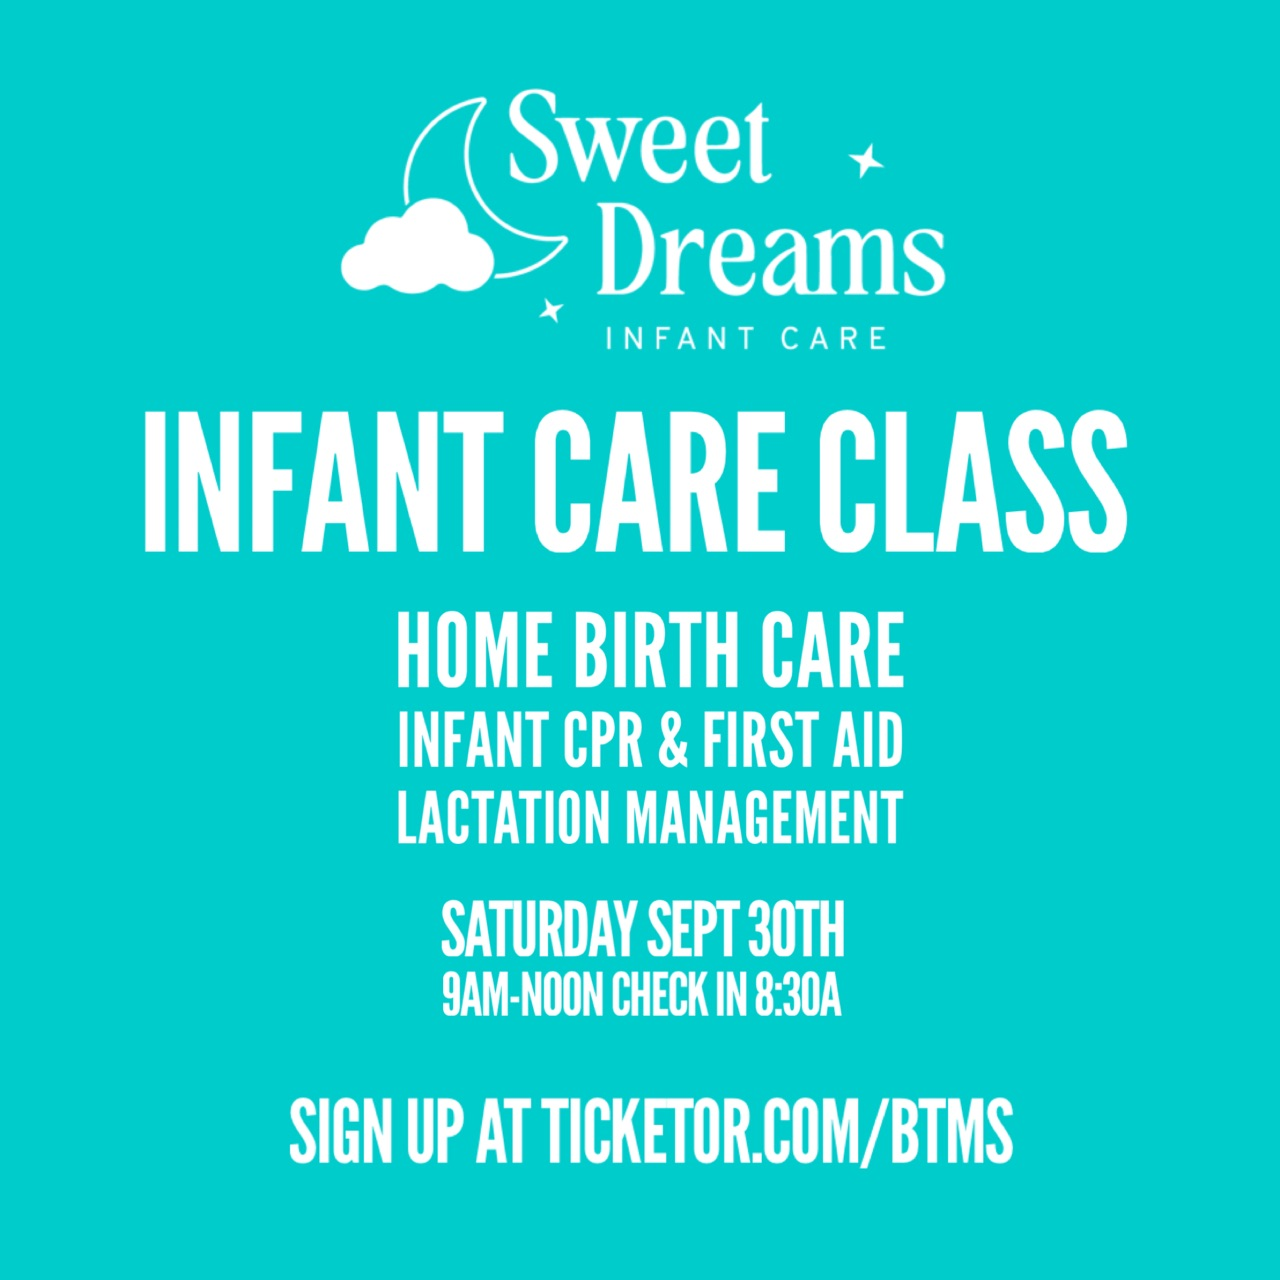 Infant Care Class presented by Sweet Dreams Infant Care www.sweetdreamsinfantcare.com on Sep 30, 09:00@Hilton Oak Brook Hills Resort - Buy tickets and Get information on BTMS LLC 